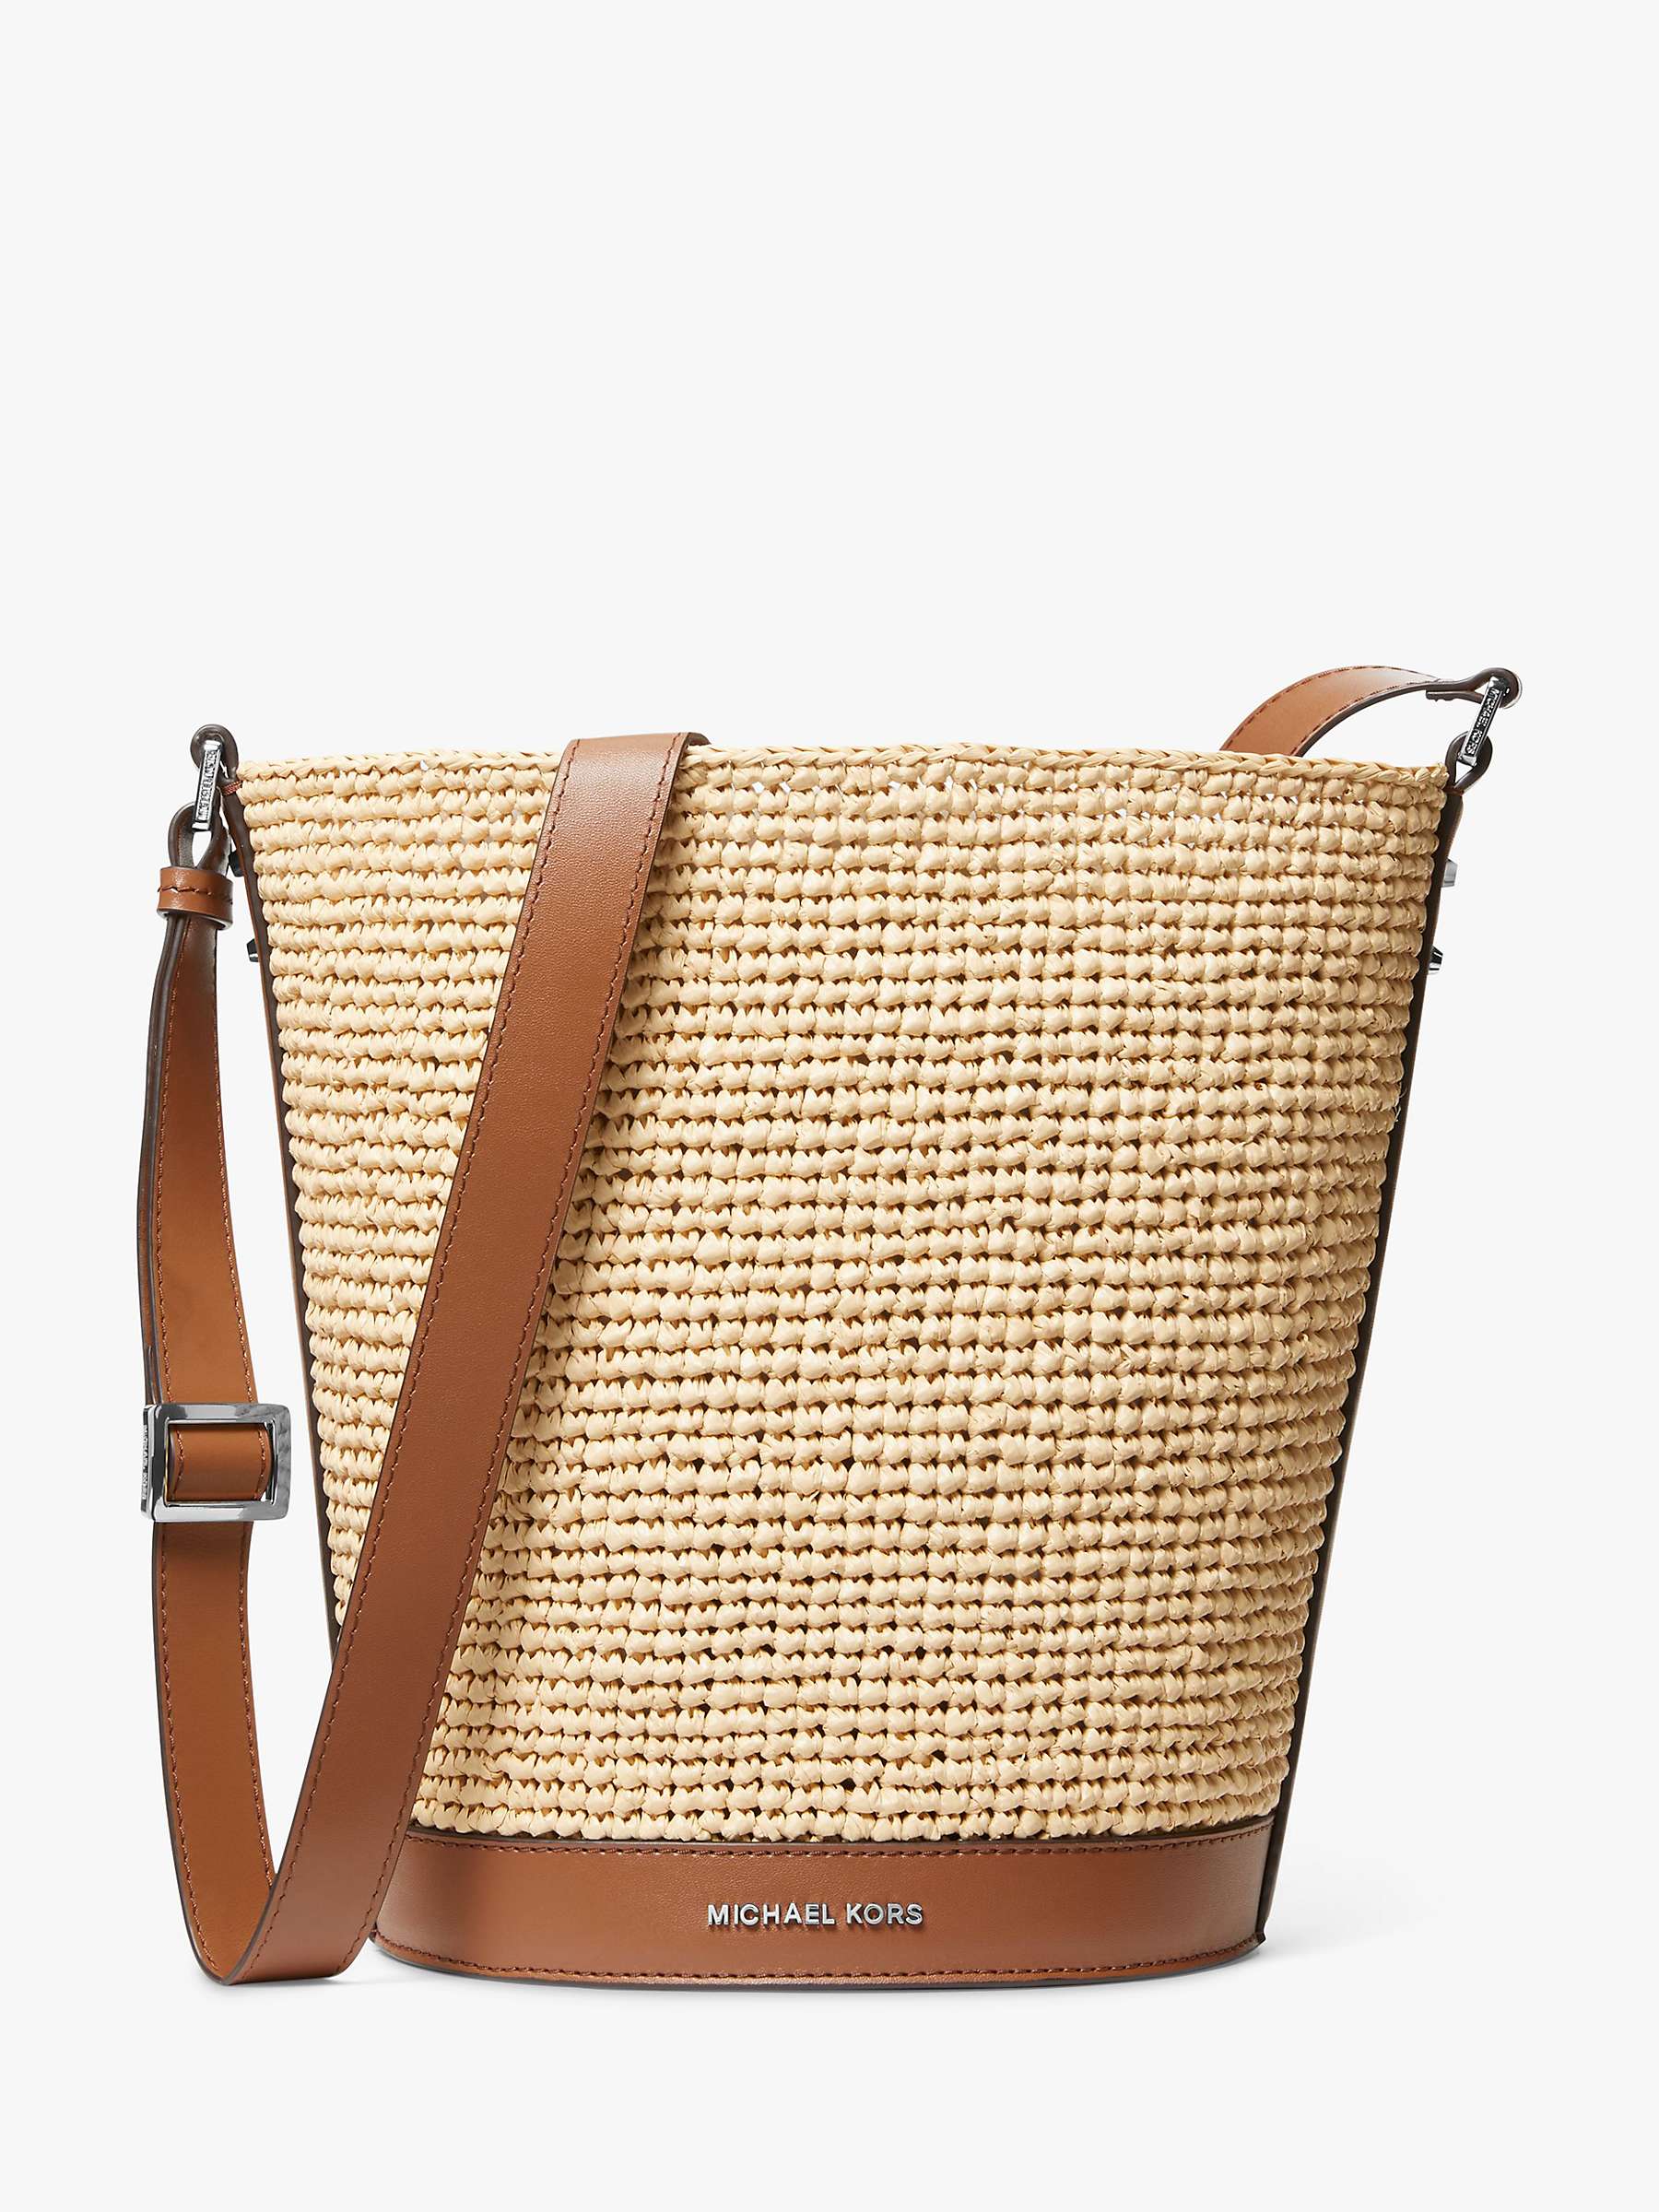 Buy Michael Kors Townsend Straw Bucket Bag, Natural/Luggage Online at johnlewis.com